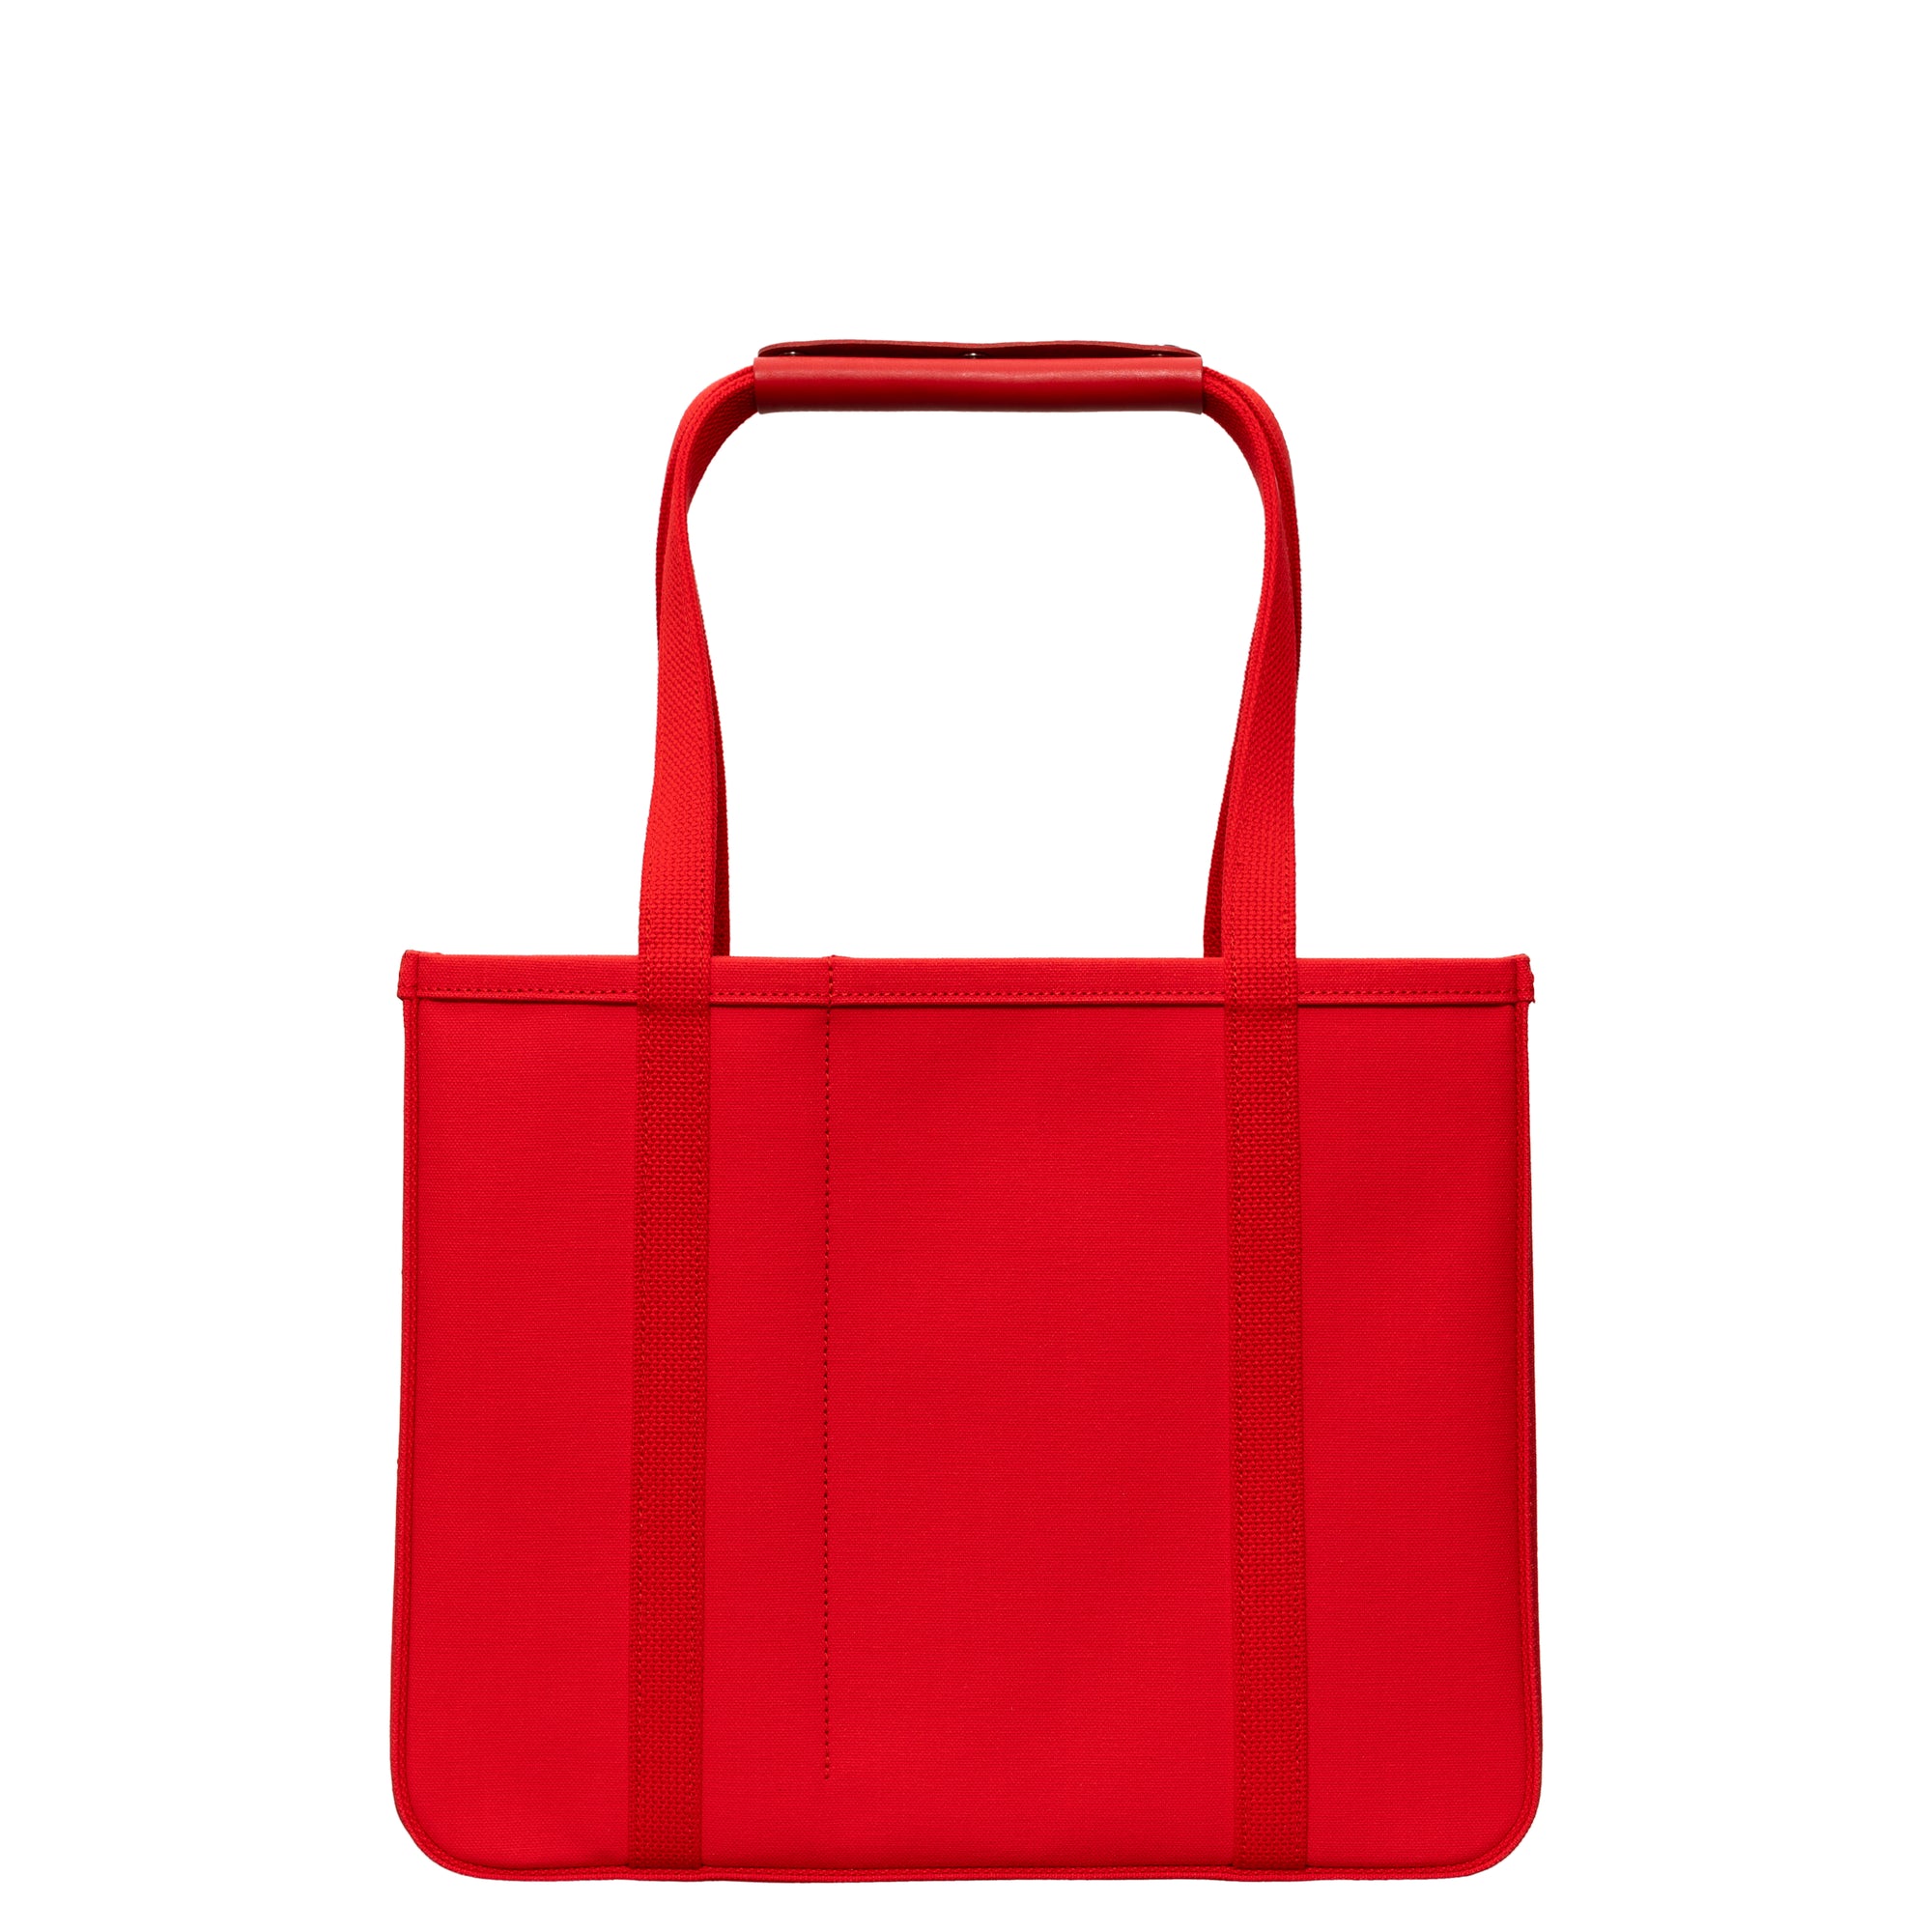 CHACOLI - 03 TOTE W400 X H330 X D140 - (RED) view 1